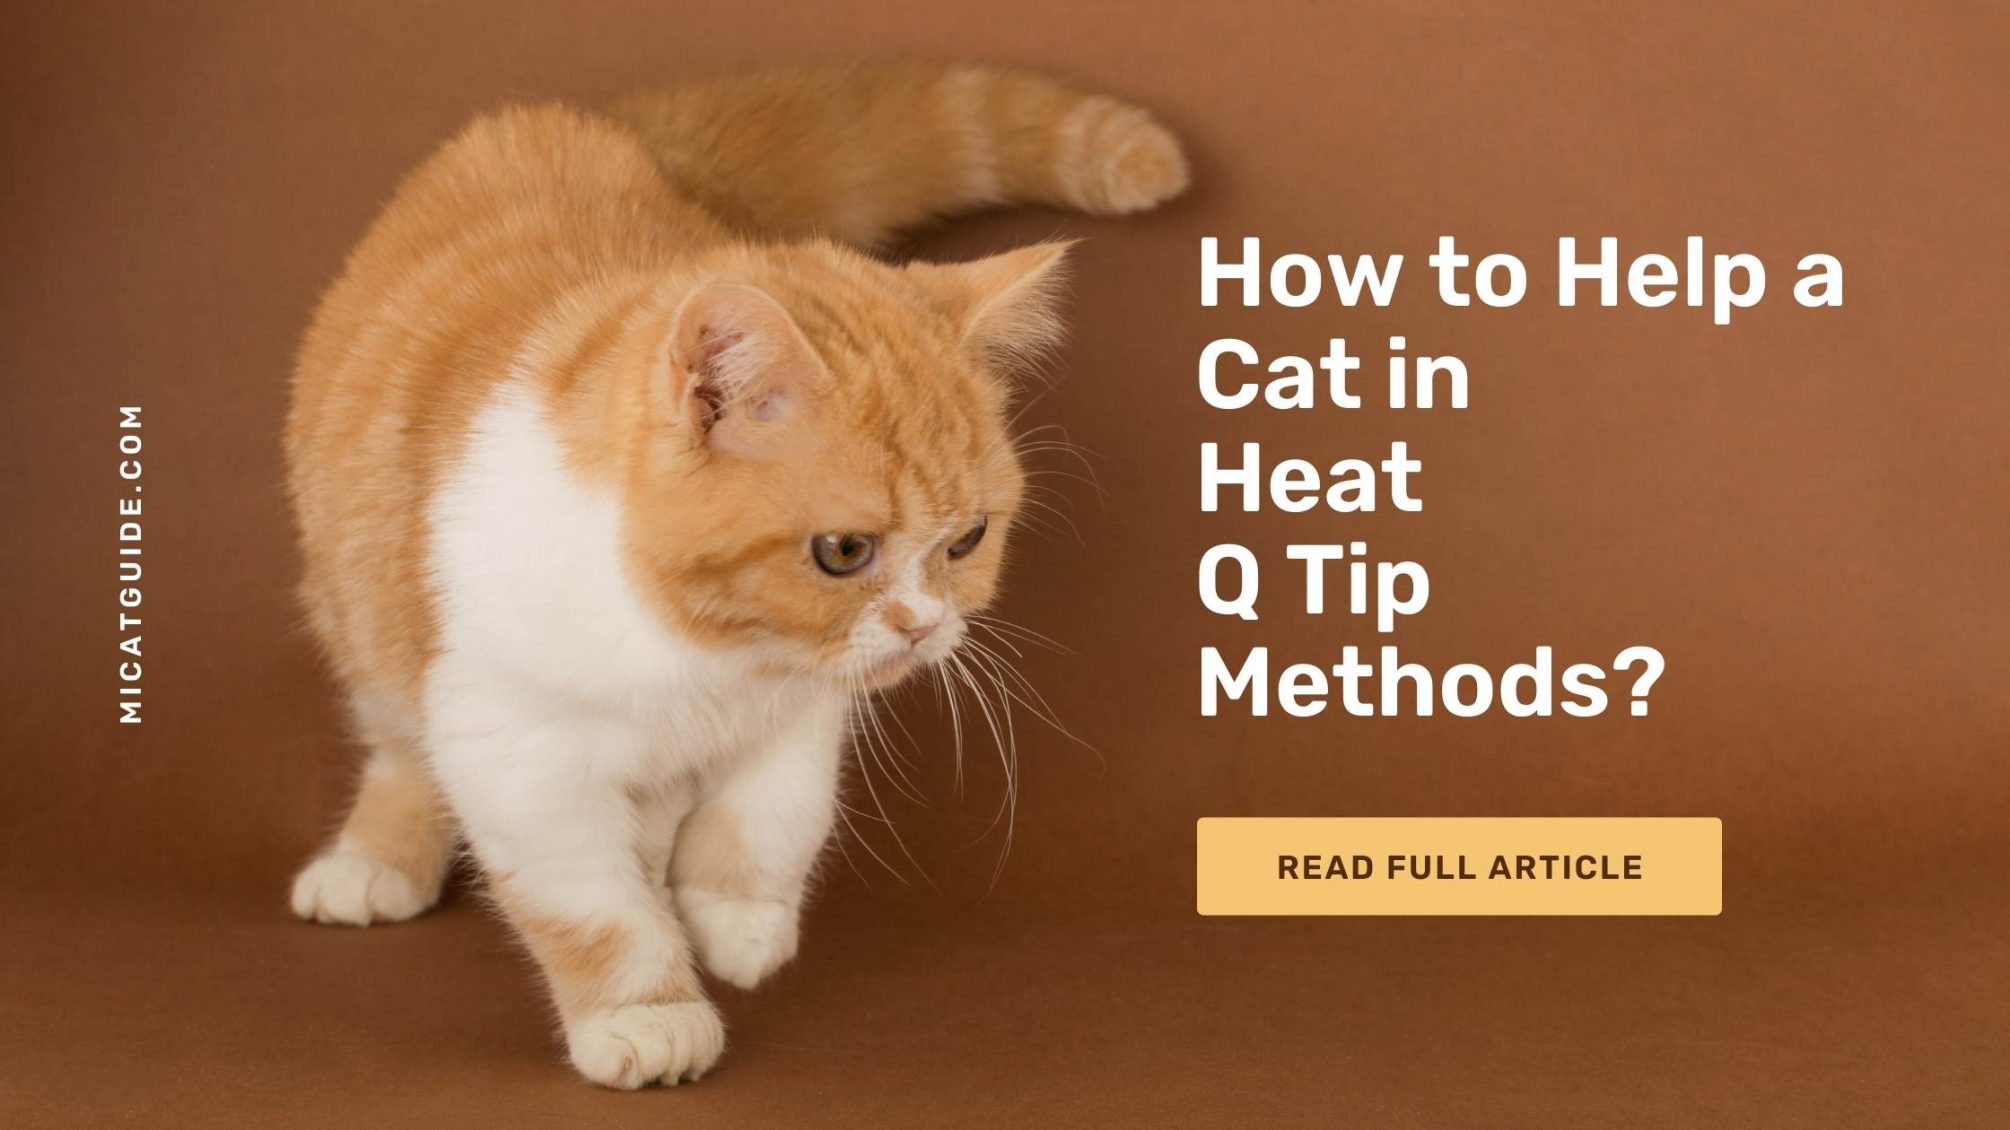 How to Get A Cat Out of Heat Q Tip? (6 Other Steps)